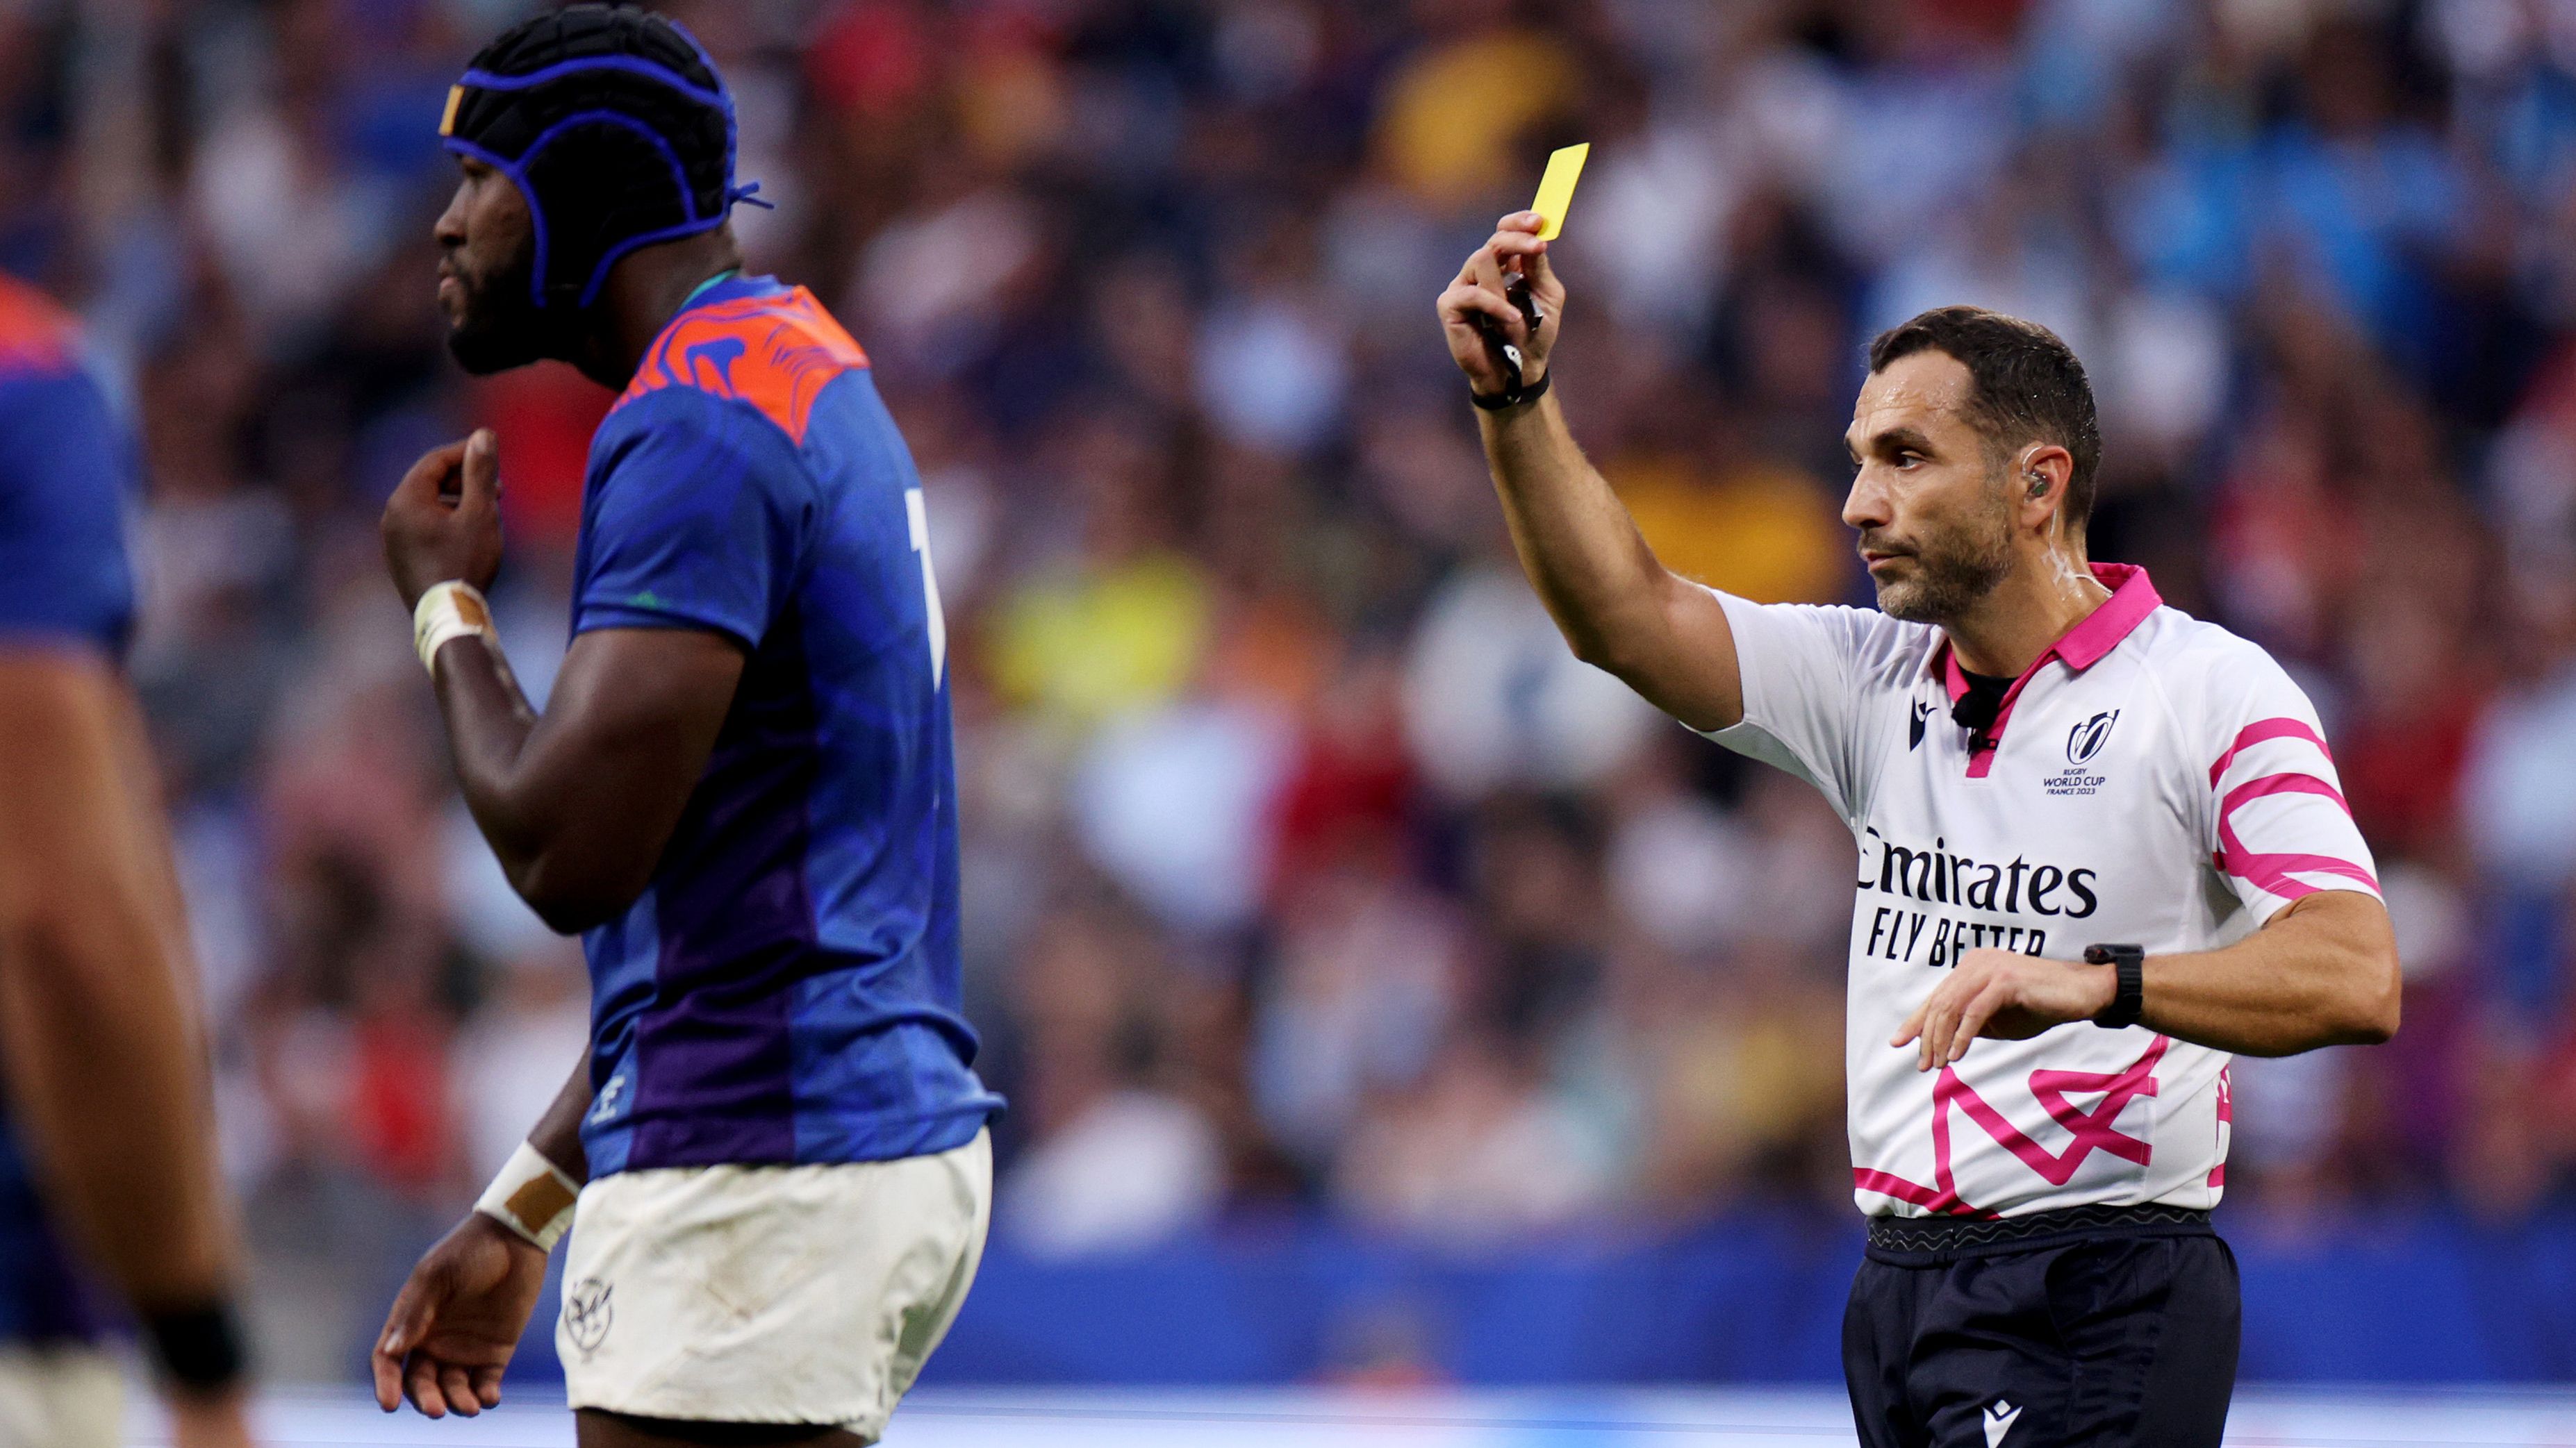 Tjiuee Uanivi of Namibia leaves the field after receiving a yellow card from Referee Mathieu Raynal, as a 8-Minute window for a TMO Bunker Review begins during the Rugby World Cup France 2023 match between Uruguay and Namibia at Parc Olympique on September 27, 2023 in Lyon, France. (Photo by Adam Pretty - World Rugby/World Rugby via Getty Images)